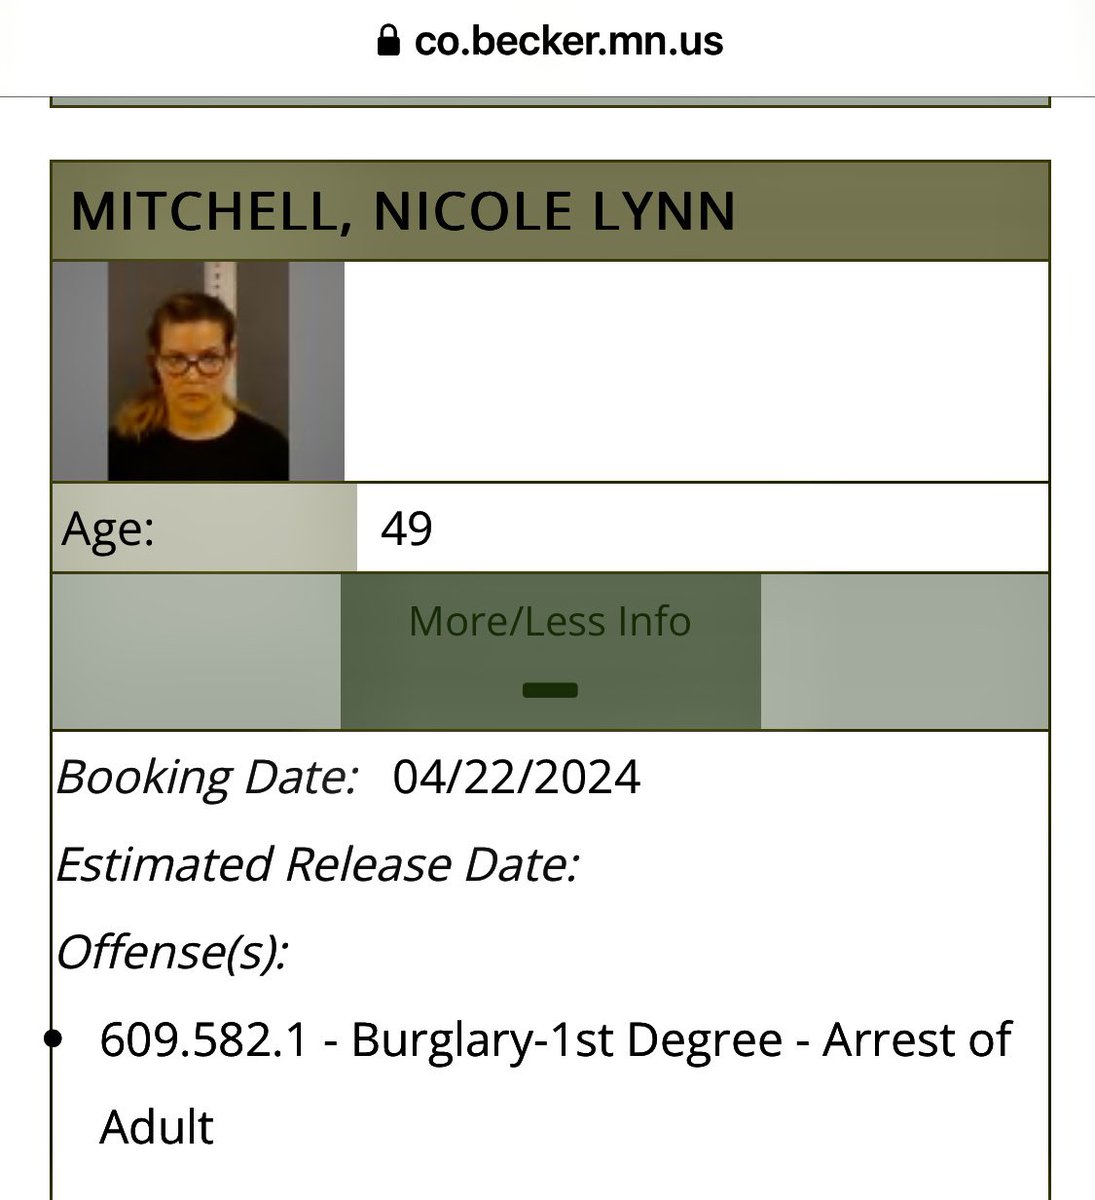 Resign NOW @Sen_NMitchell! 
We don't need any more criminals in our city. 

#Woodbury
#Minnesota 
#CRIMINAL 
#Mnleg 

Bat Shit Crazy, eh @GovTimWalz!